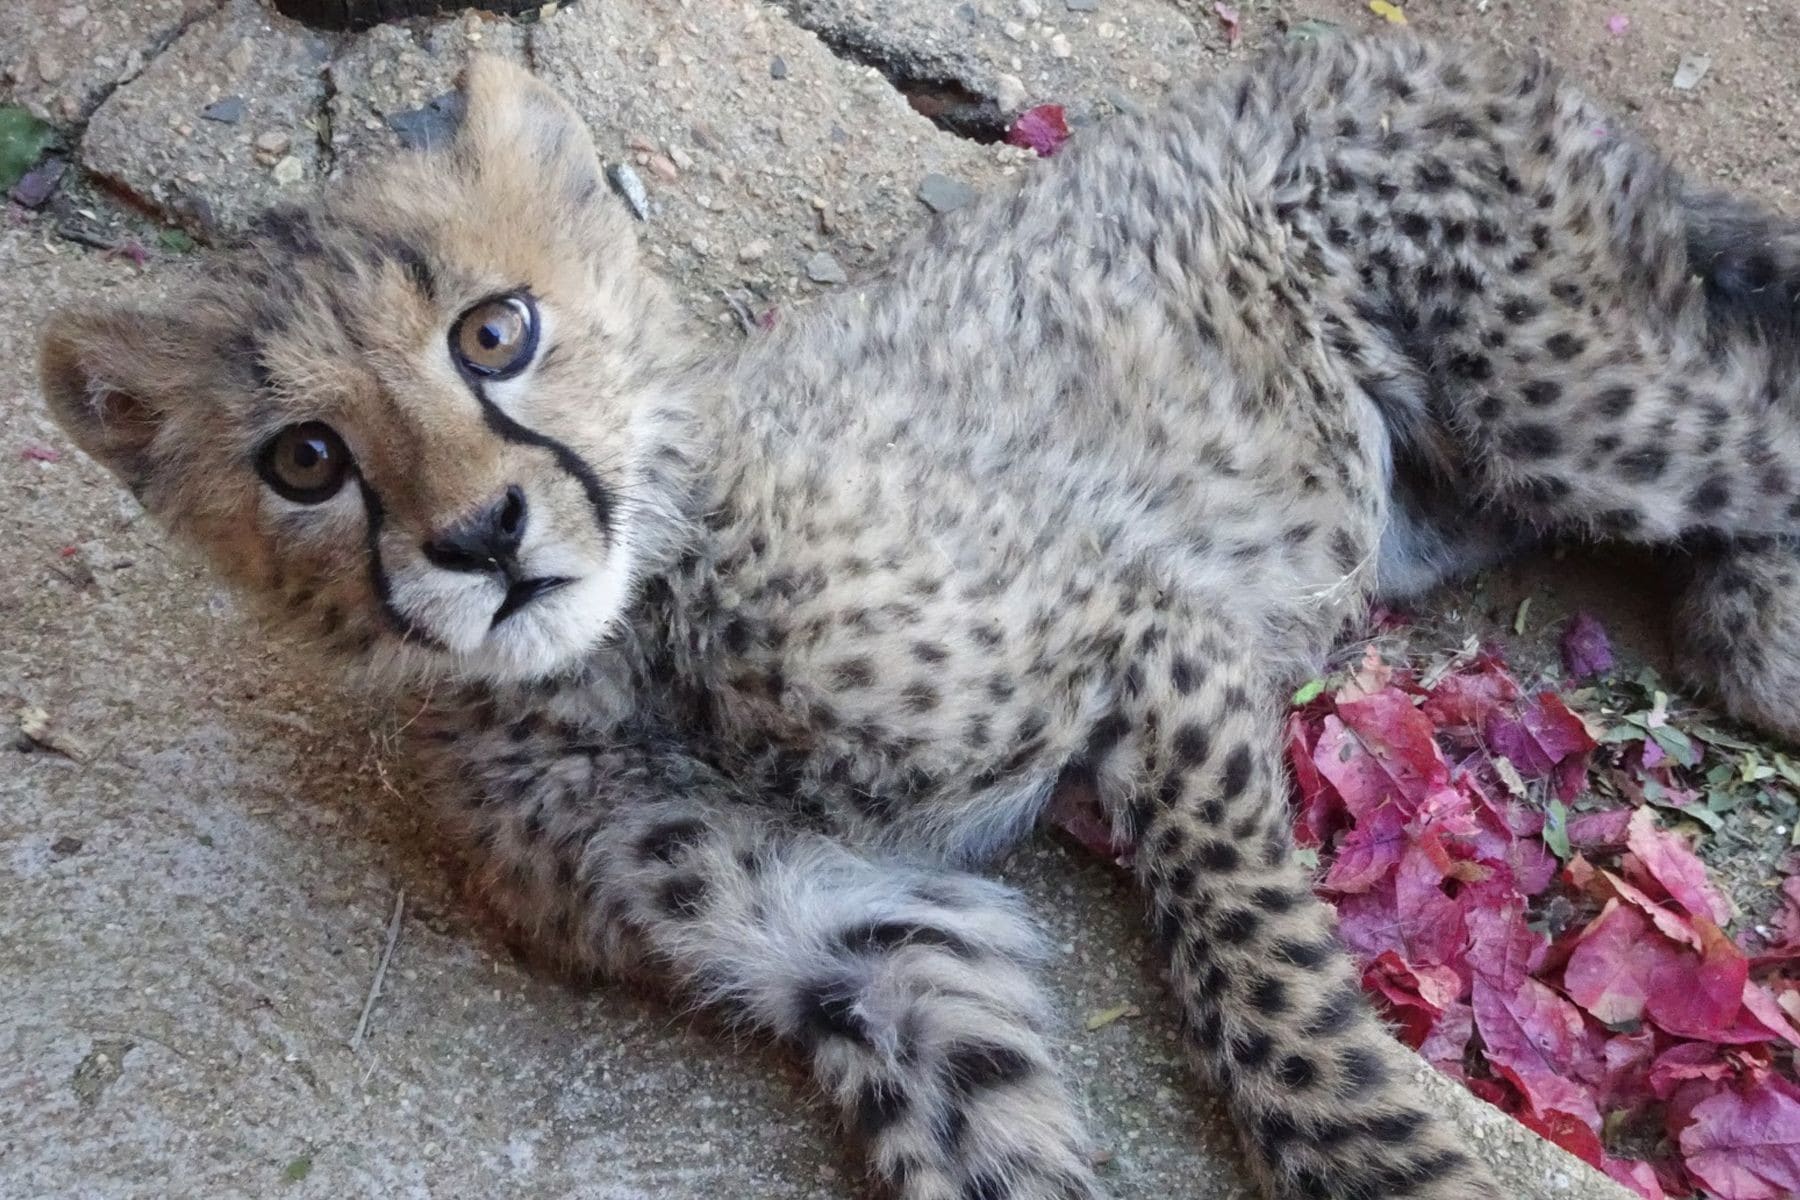 A young orphaned cheetah that luckily will survive because the Cheetah Conservation Fund takes great care of it.